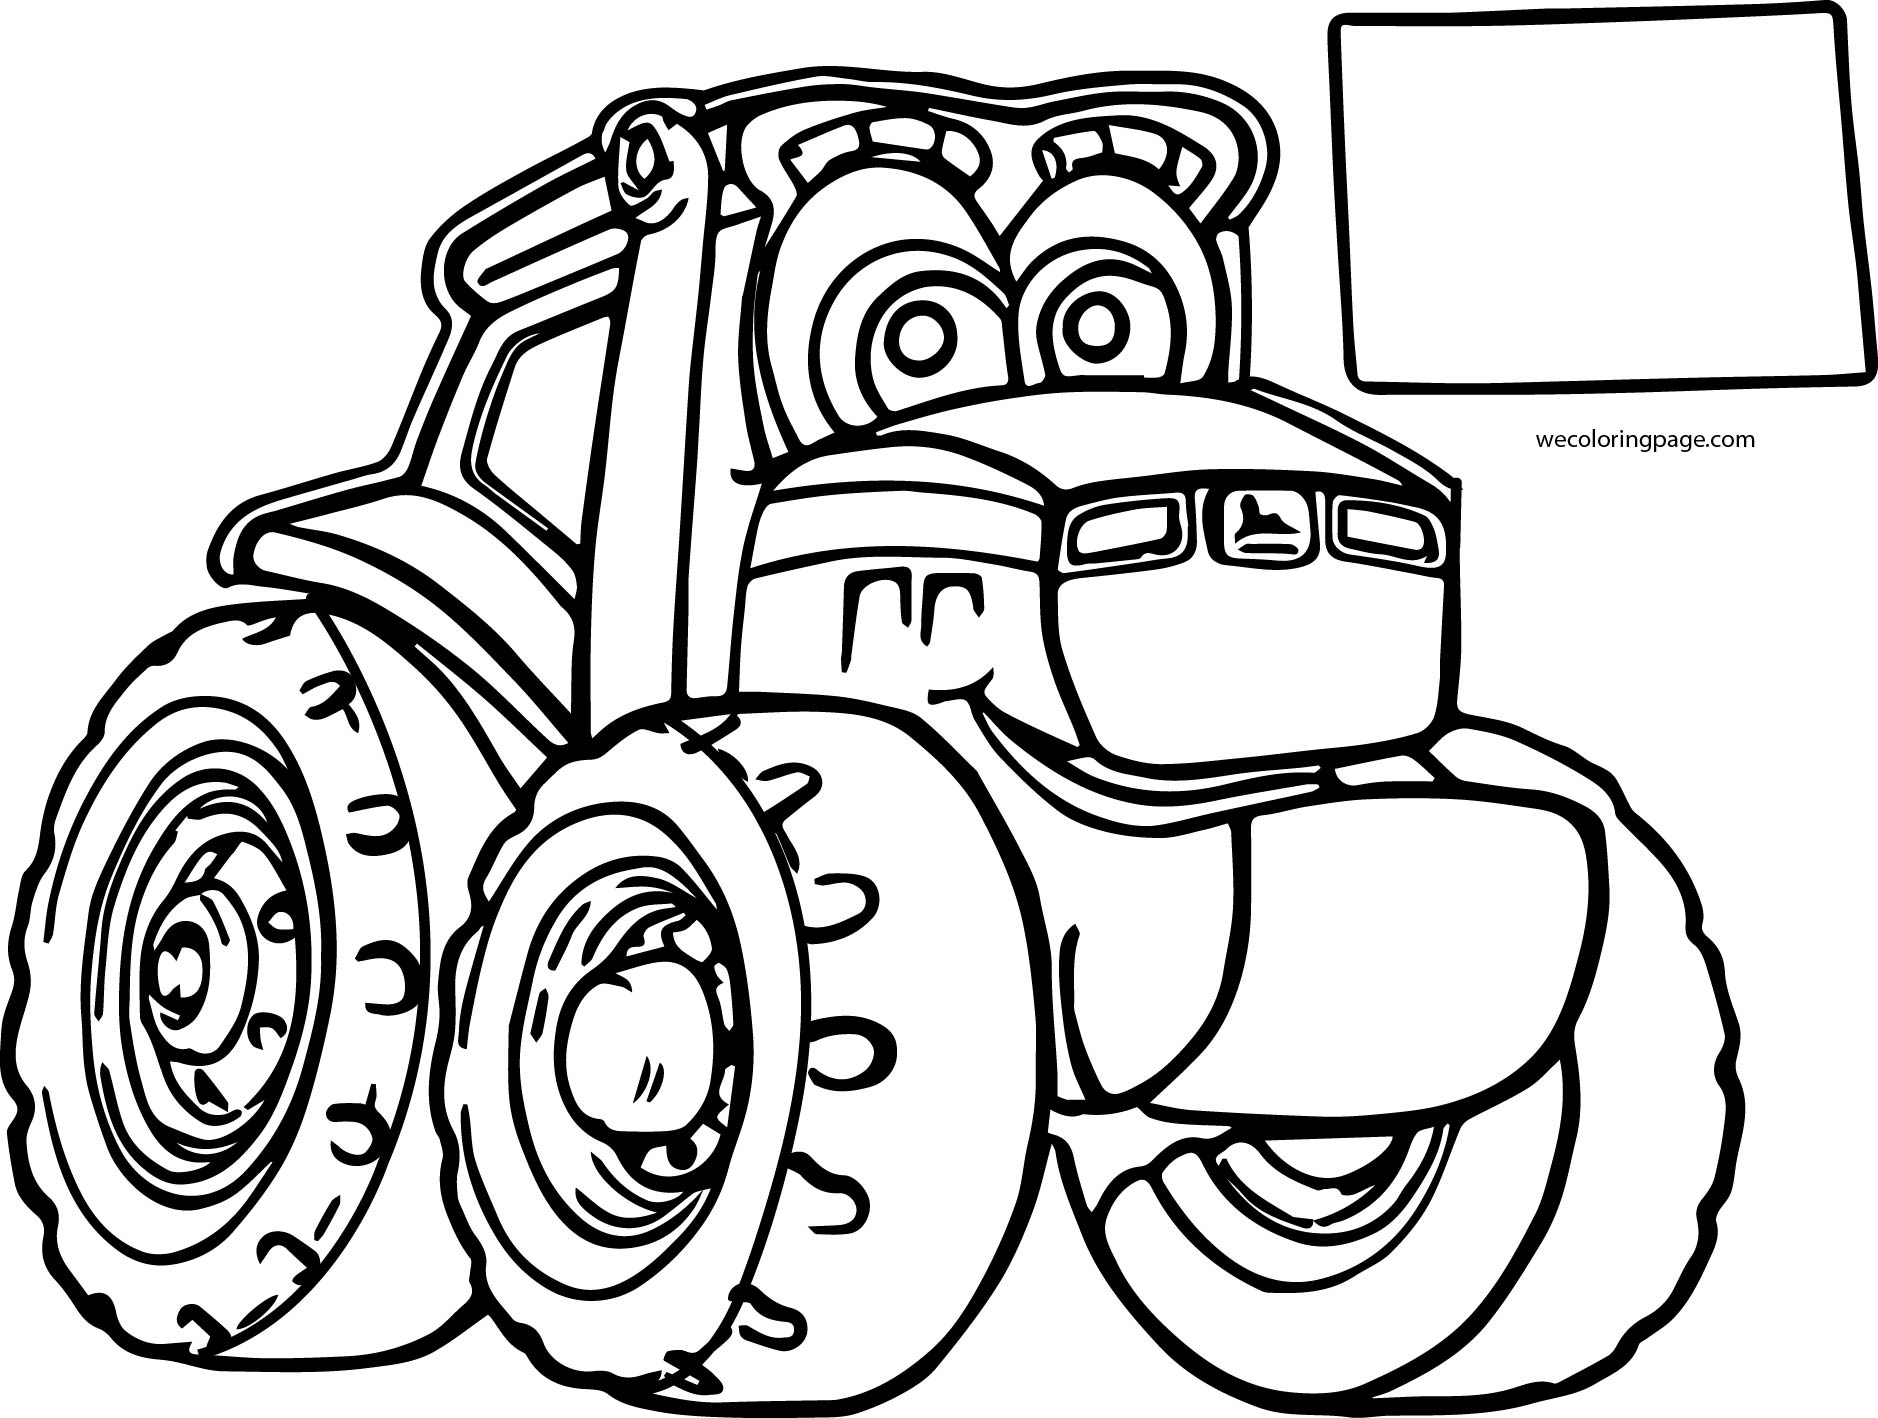 John Johnny Deere Tractor Coloring Page WeColoringPage 35